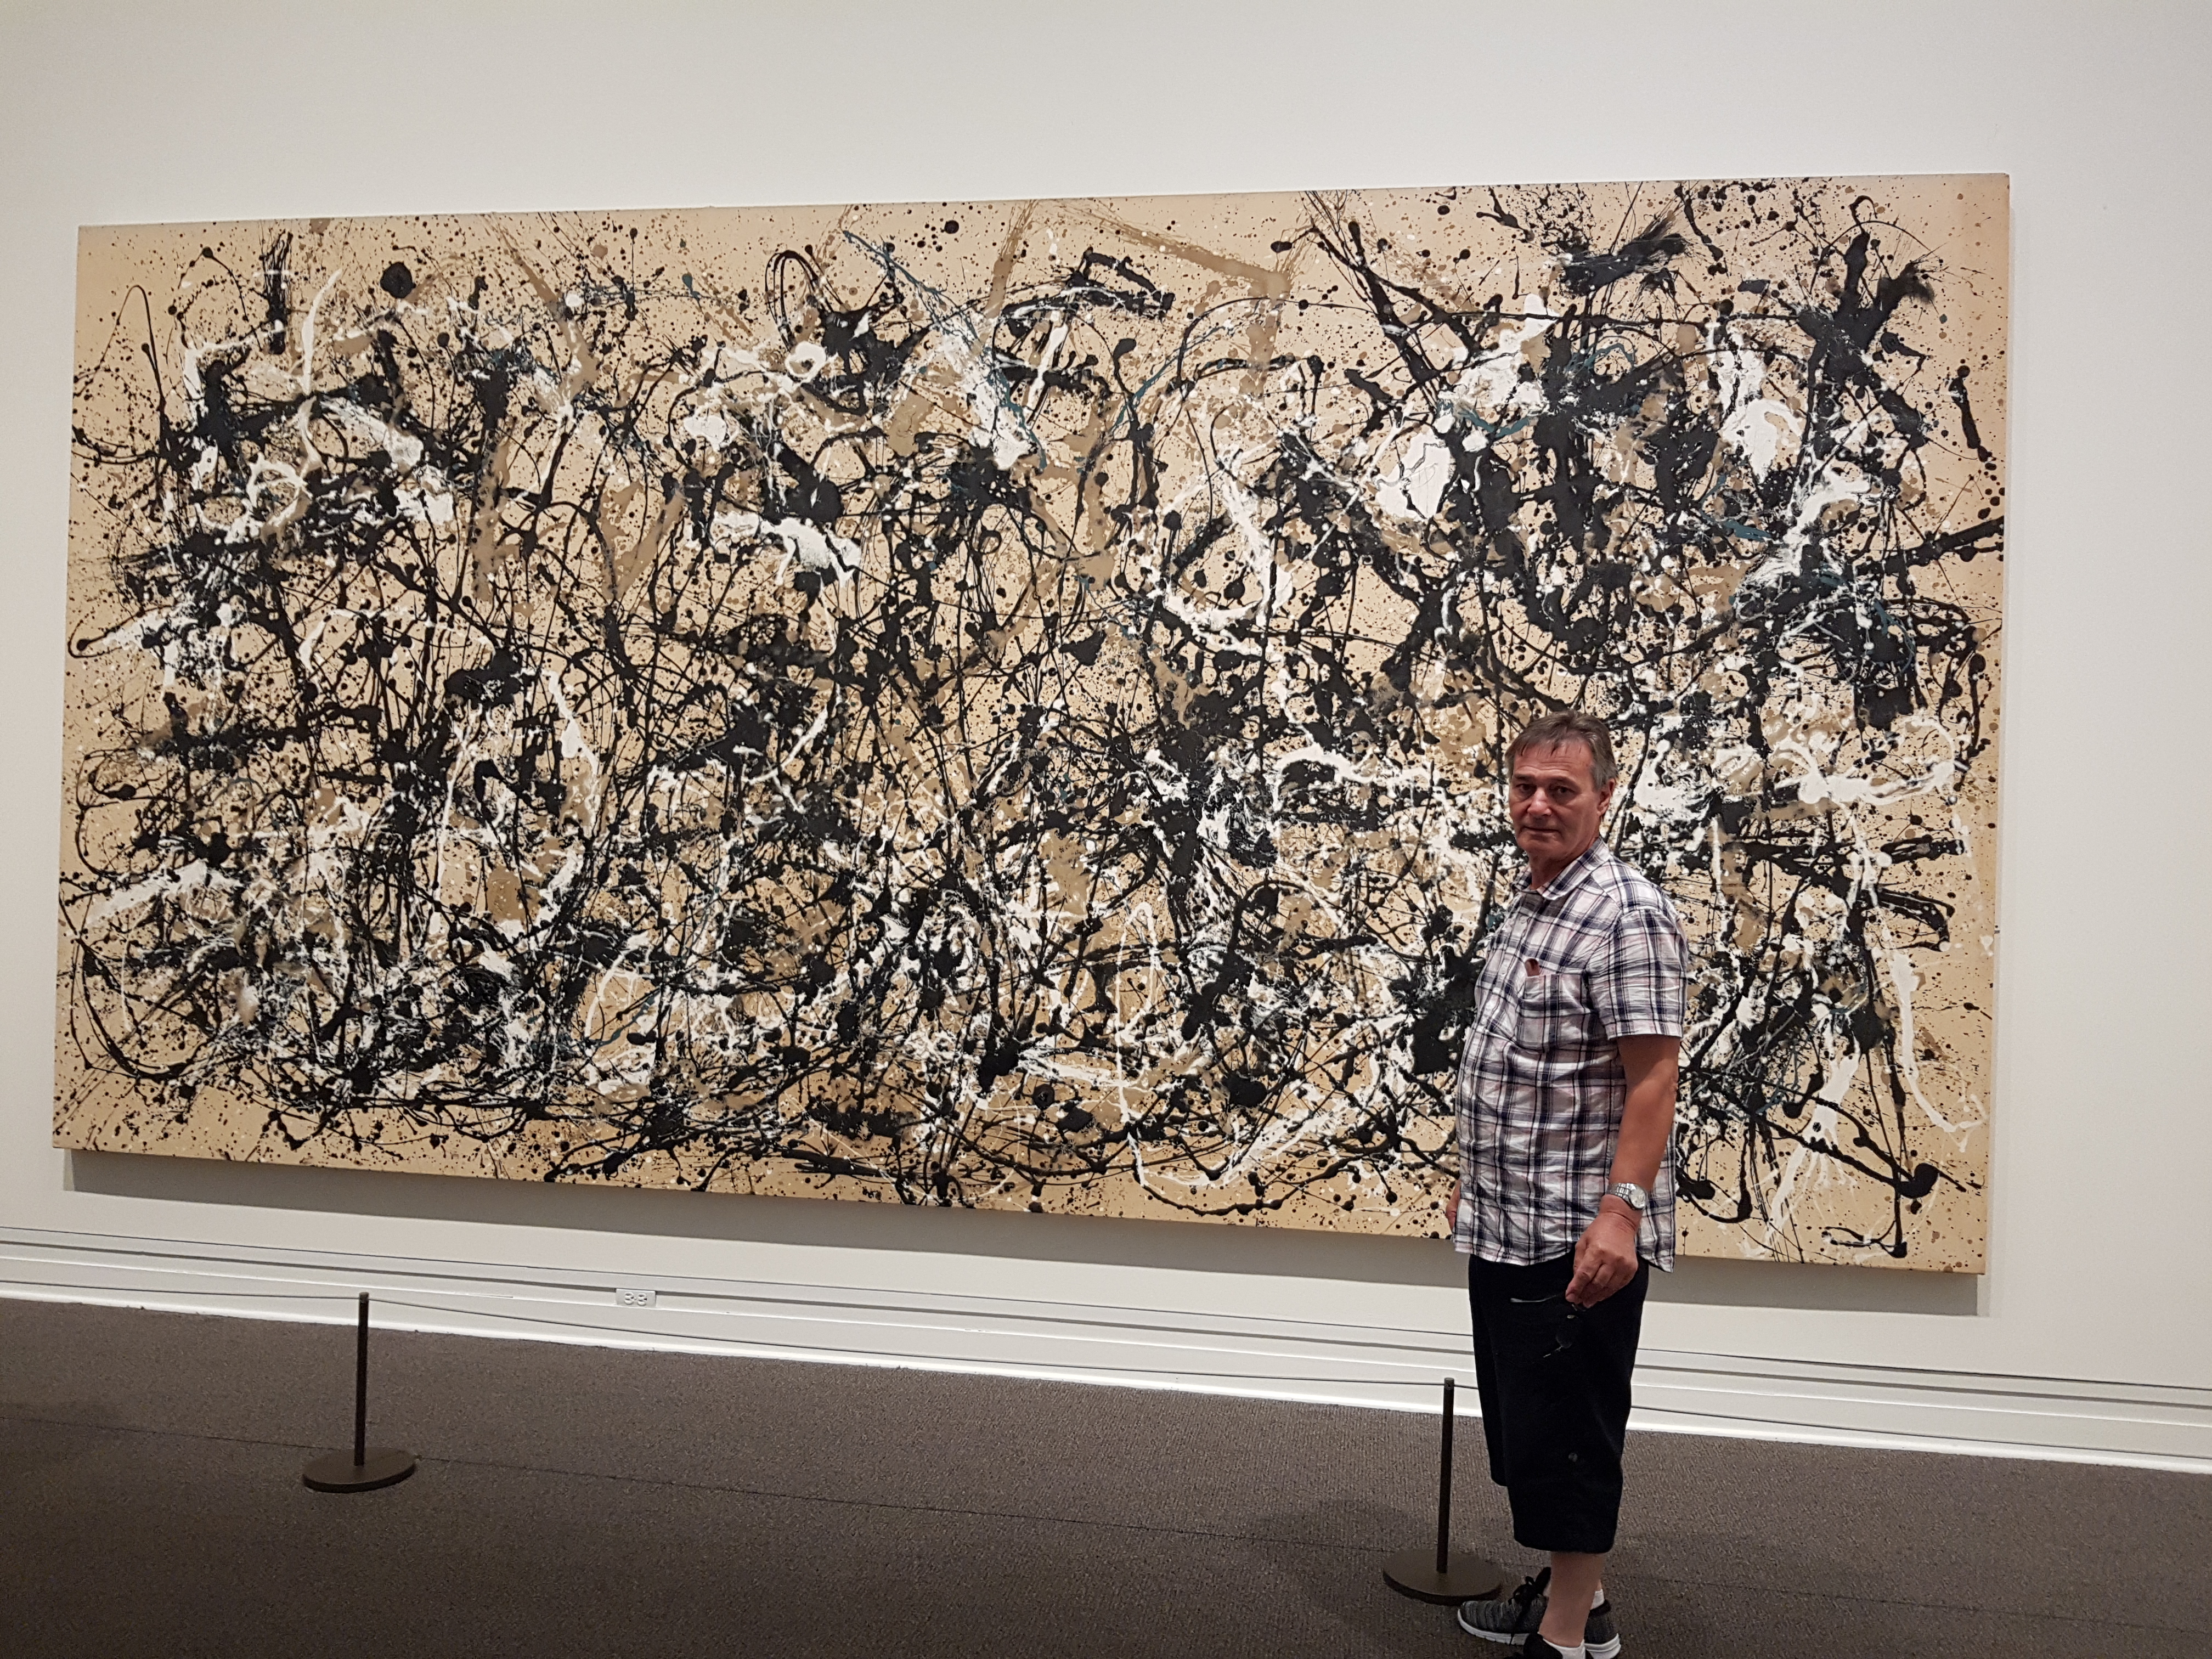 roy munday, artist, in front of a Jackson Pollock painting, new york